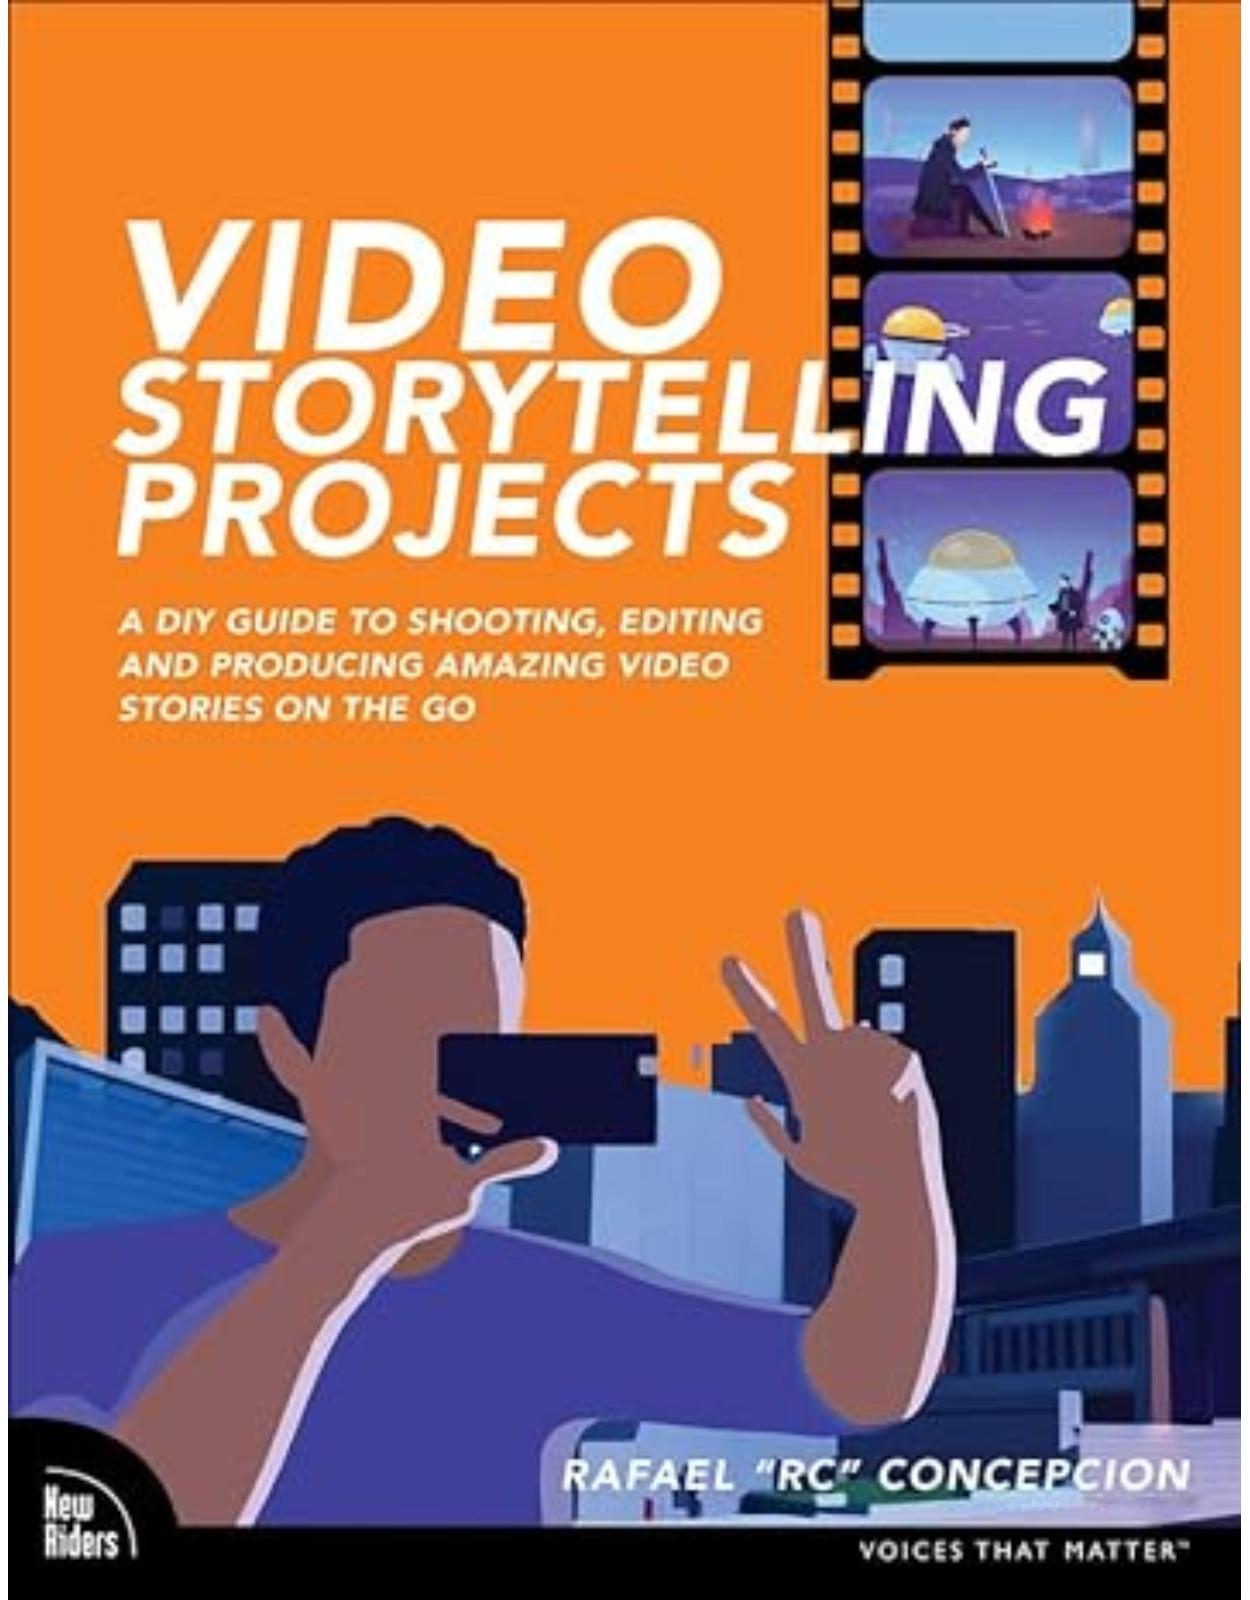 Video Storytelling Projects: A DIY Guide to Shooting, Editing and Producing Amazing Video Stories on the Go